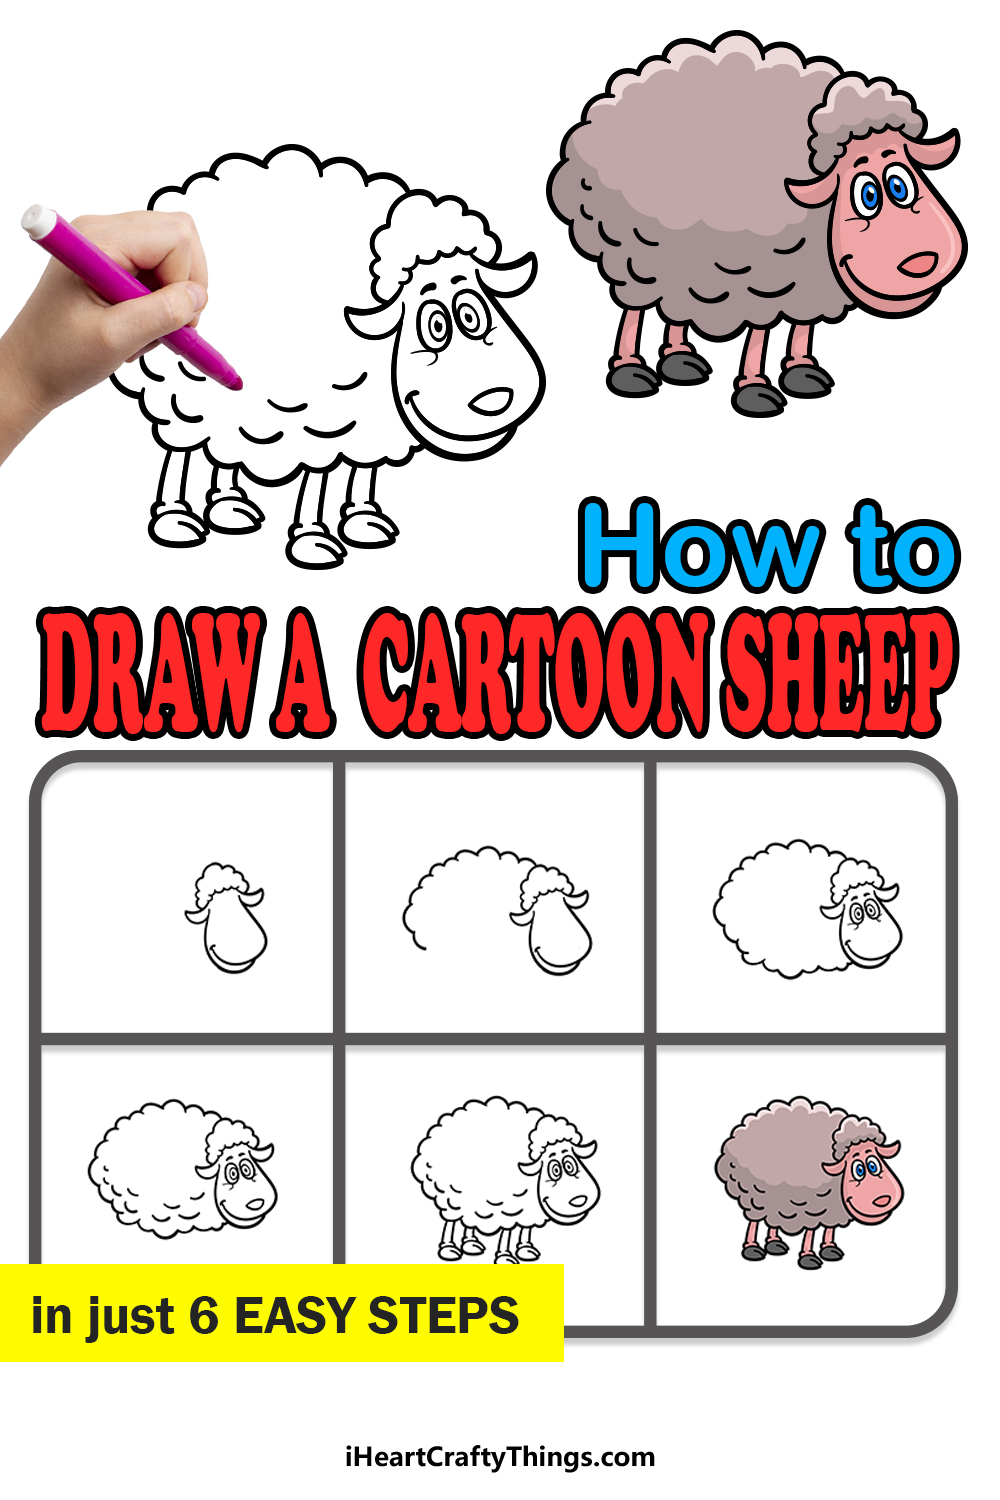 how to draw a cartoon sheep in 6 easy steps